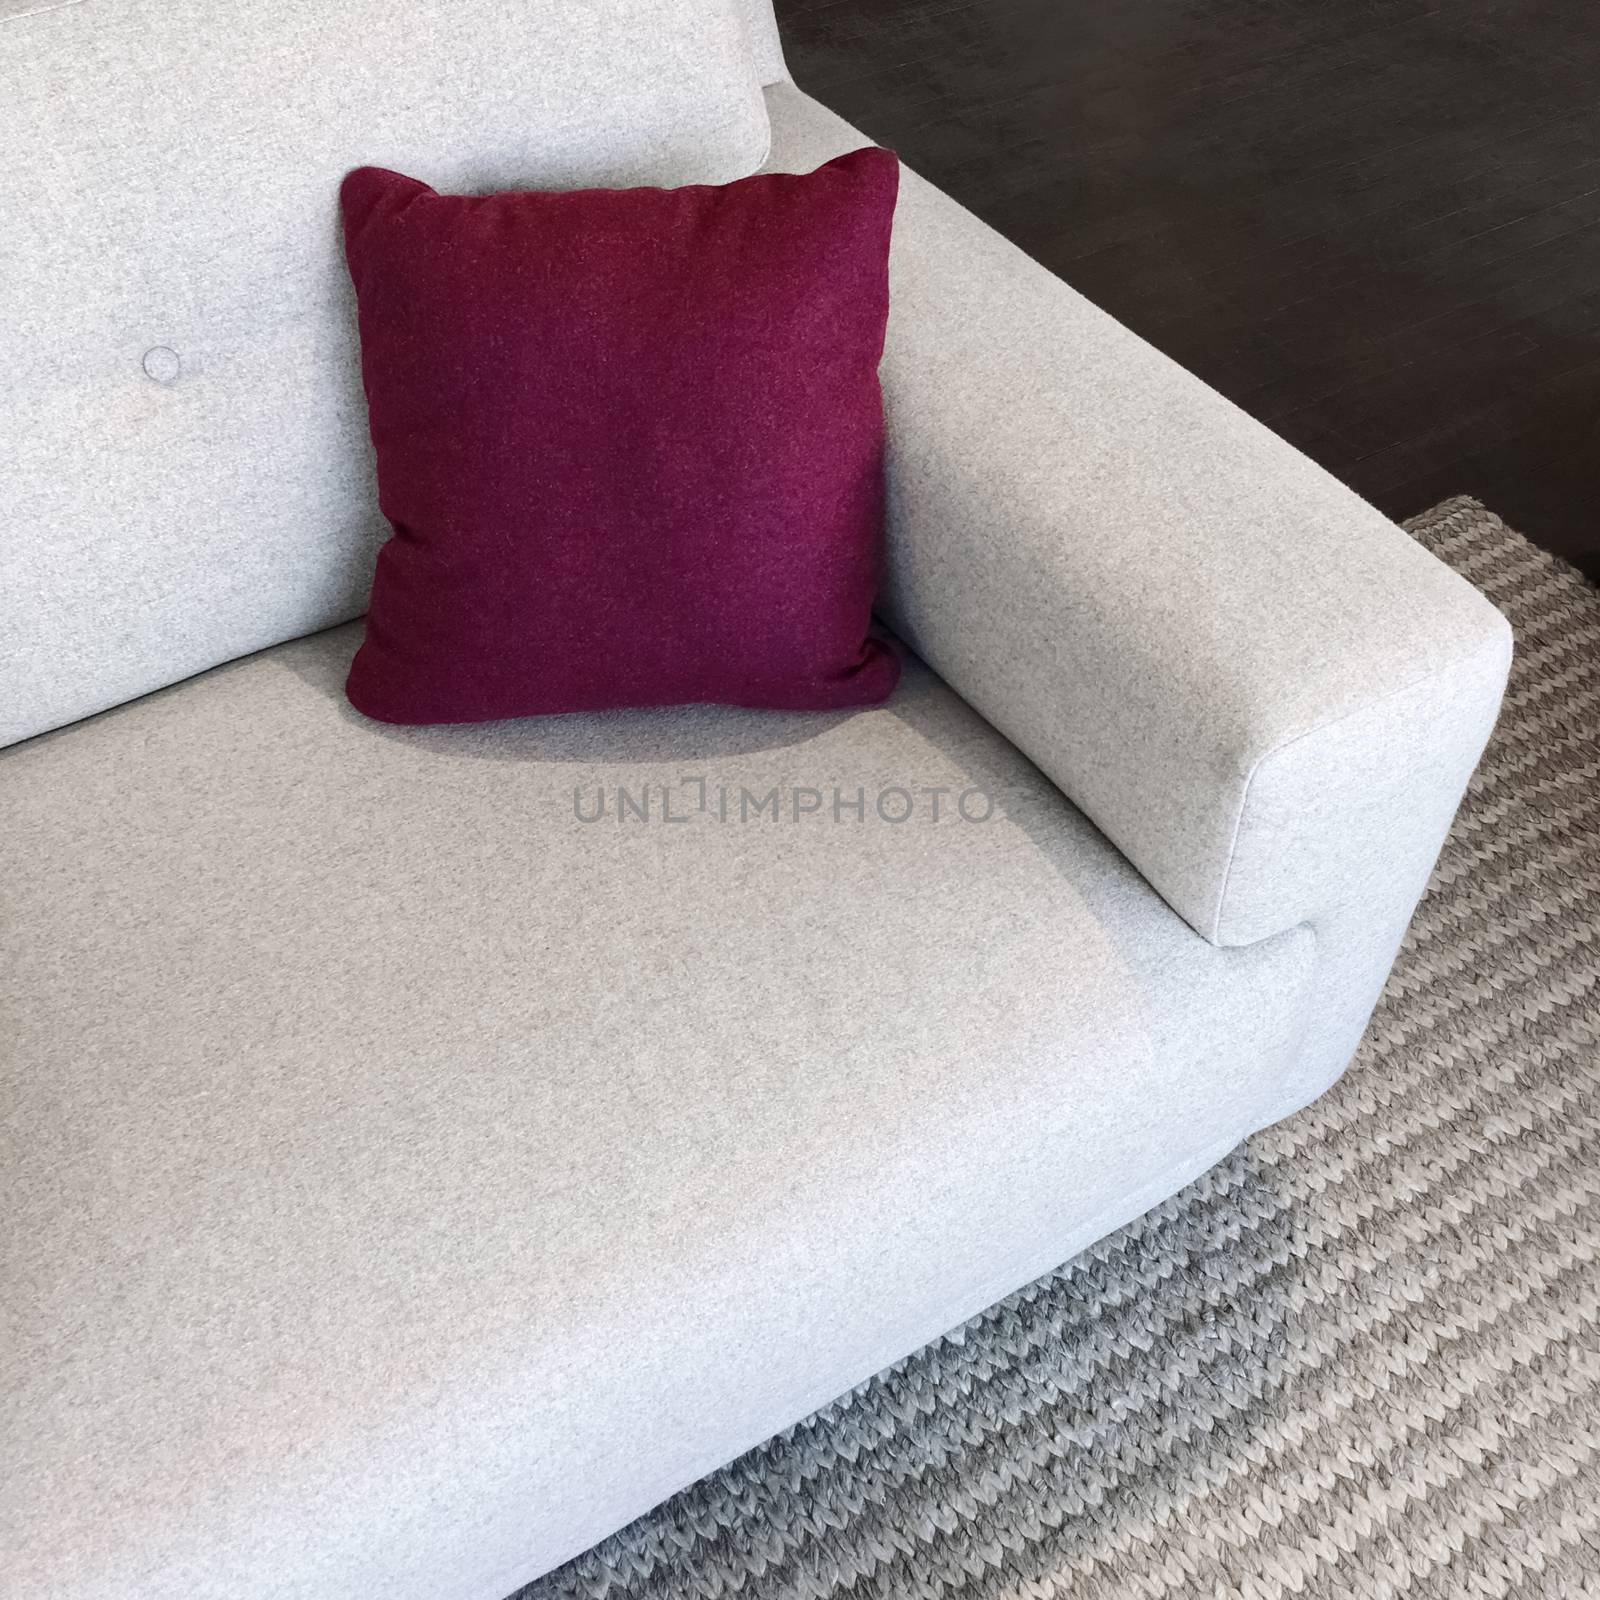 White sofa with cherry red cushion, on a gray knitted rug.